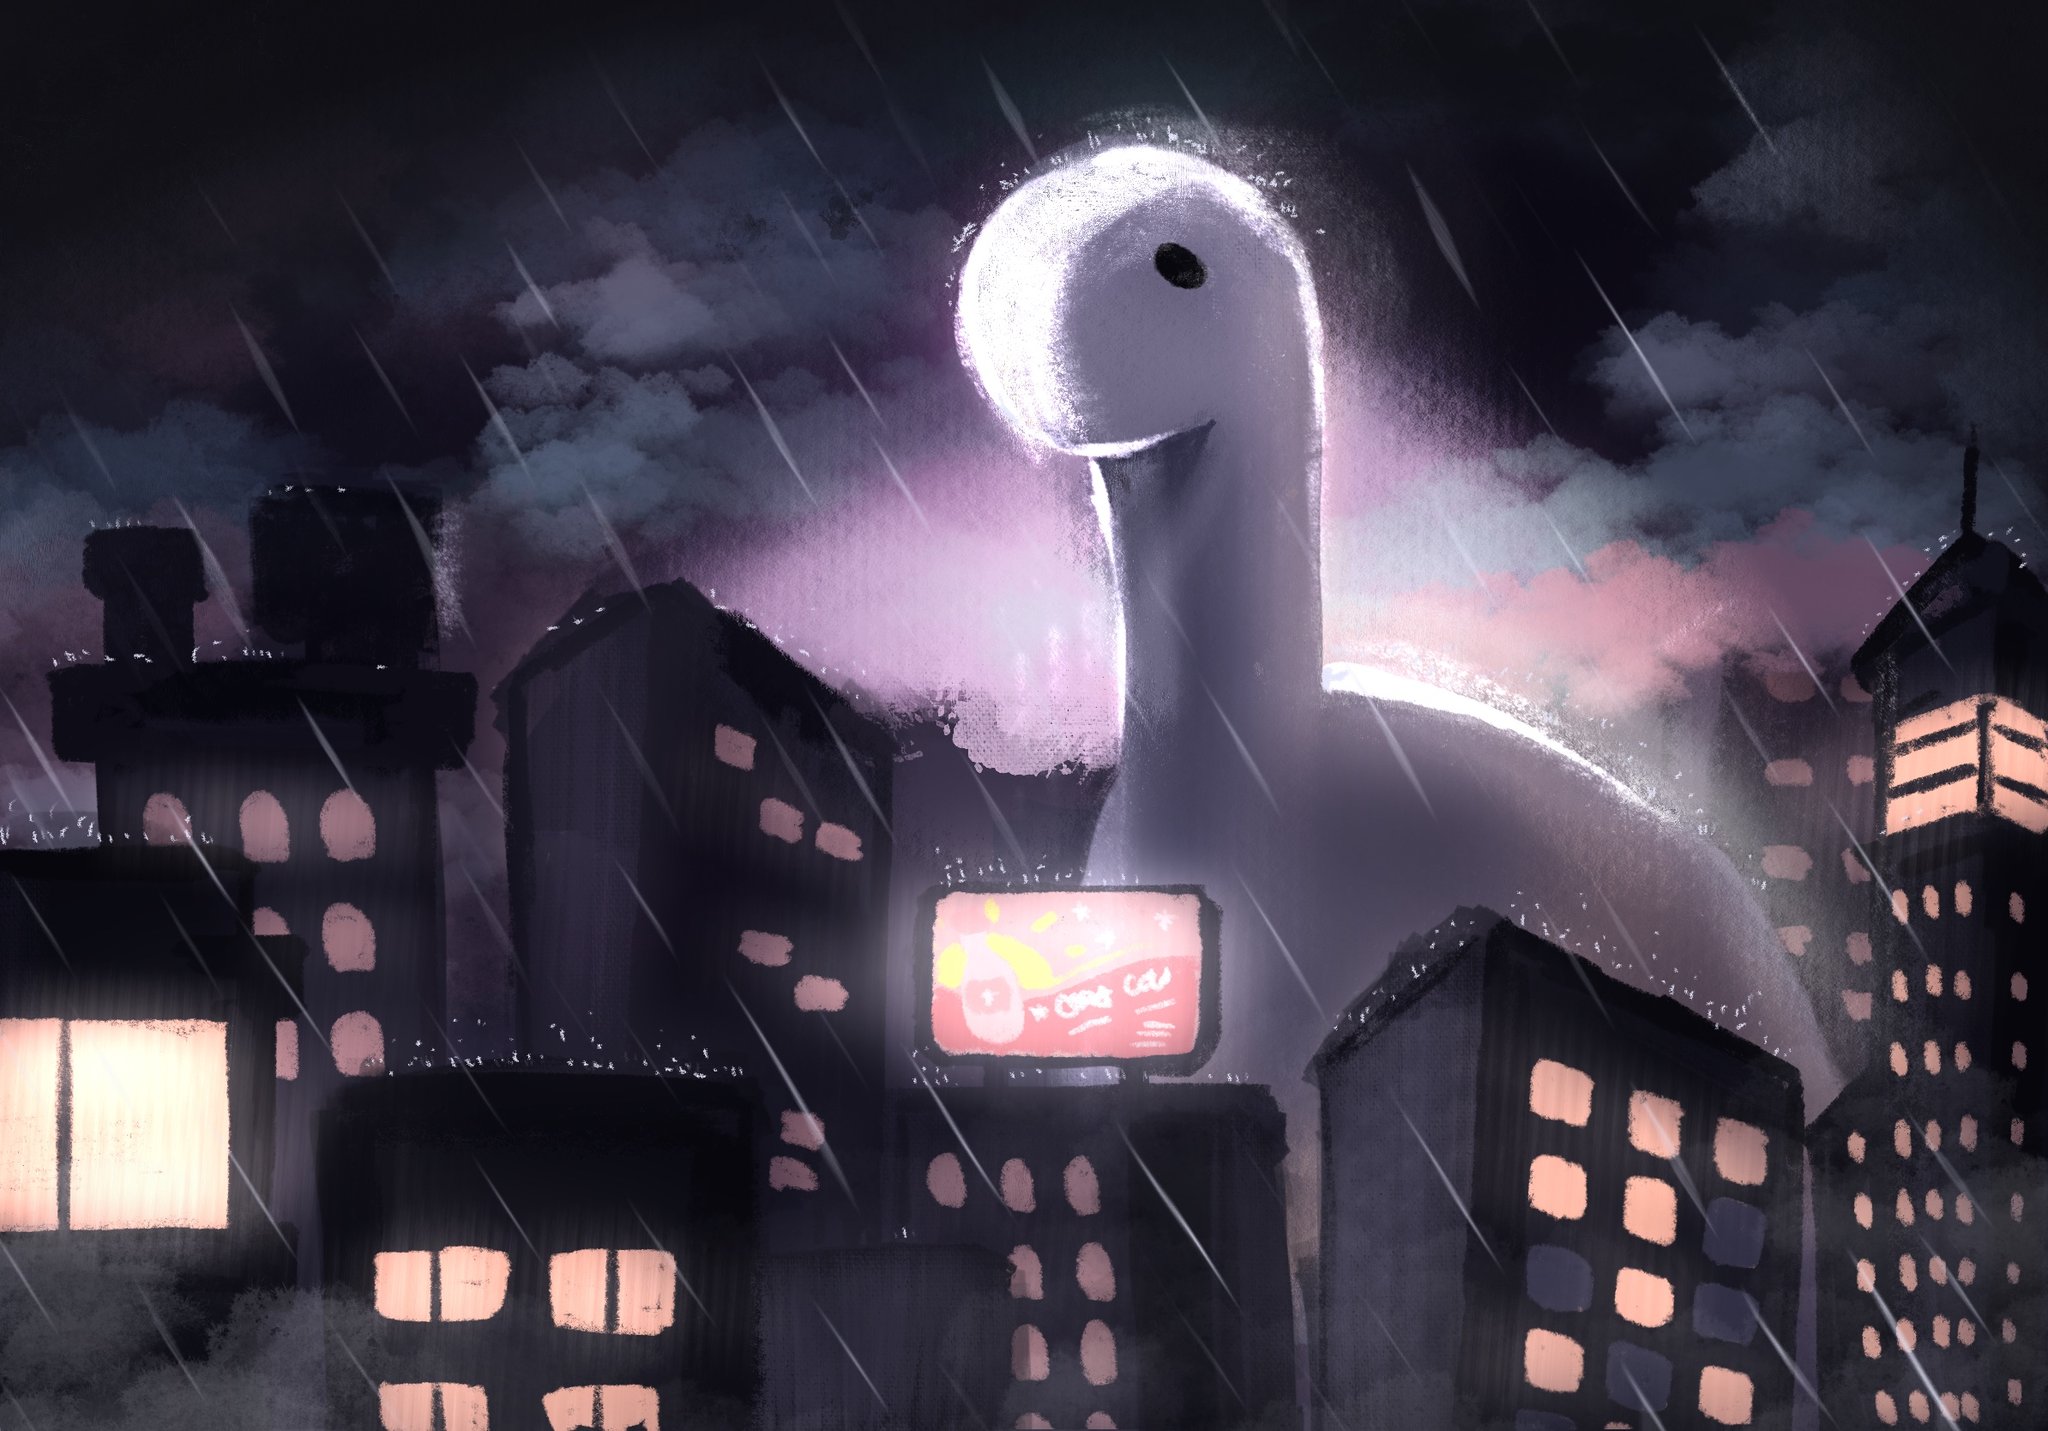 the deno mascot standing between a some tall lit up buildings at night